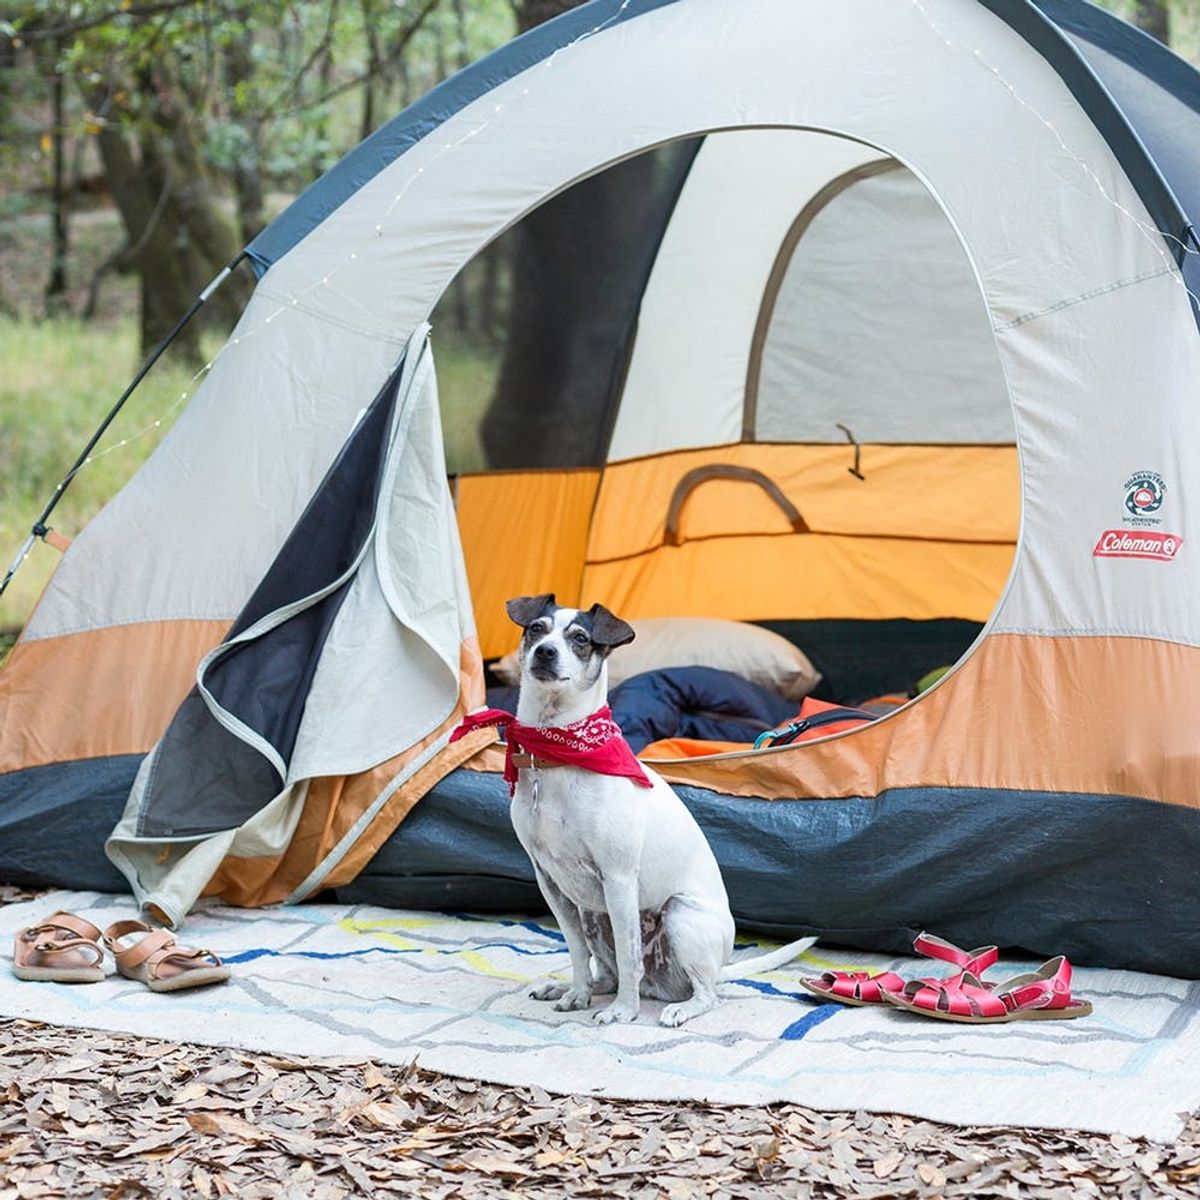 How to Have the Ultimate Girls Weekend Camping Trip